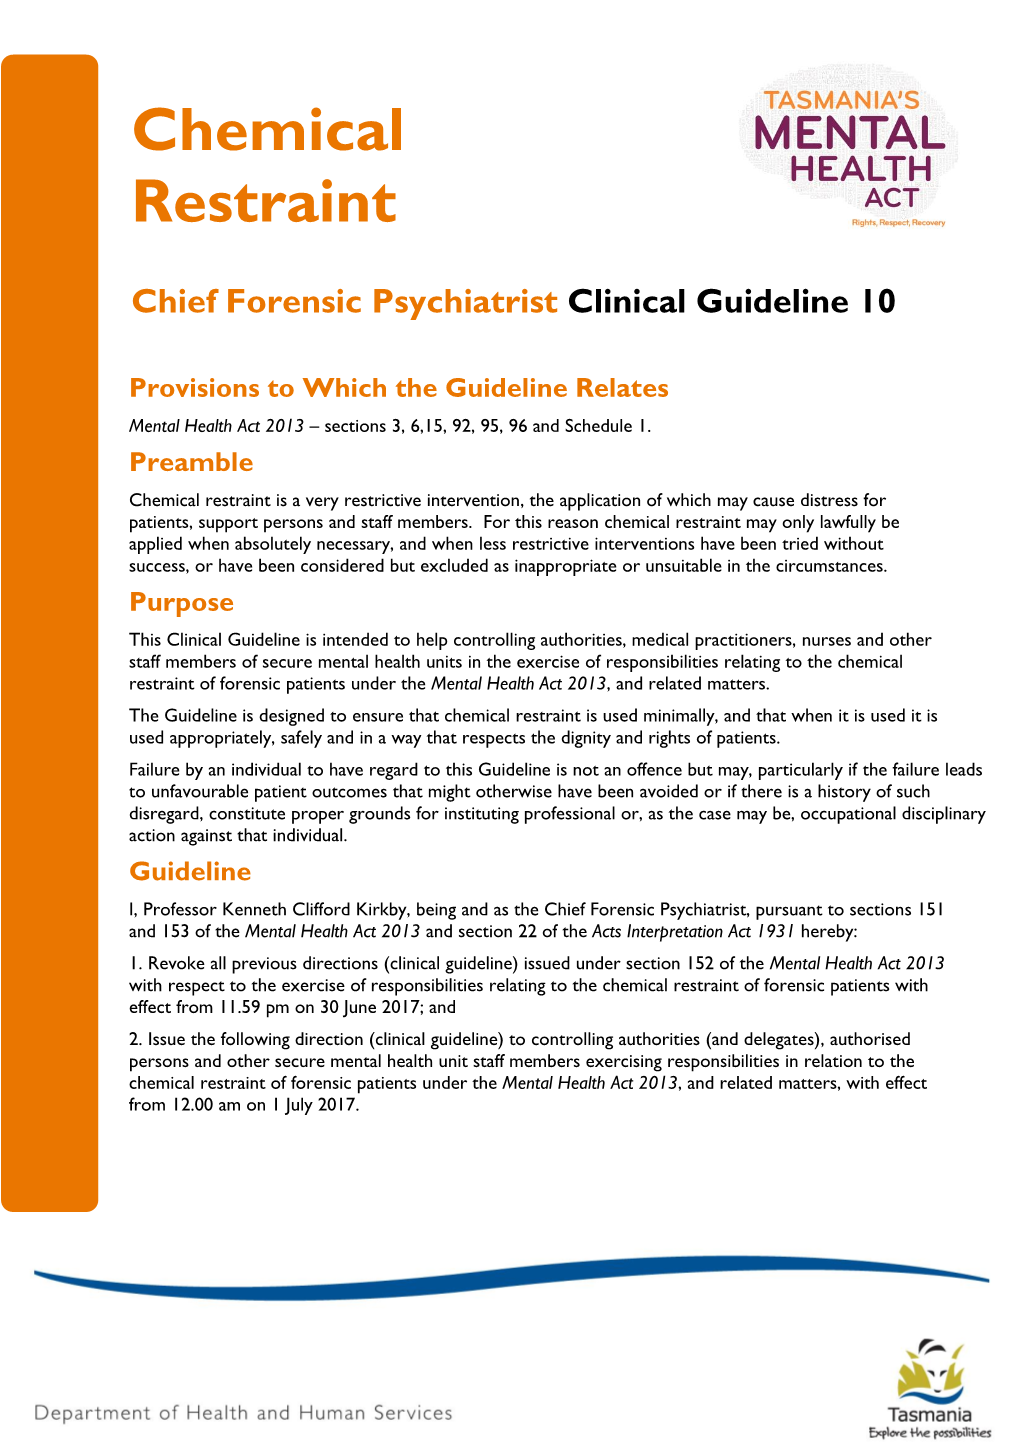 CFP Clinical Guideline 10